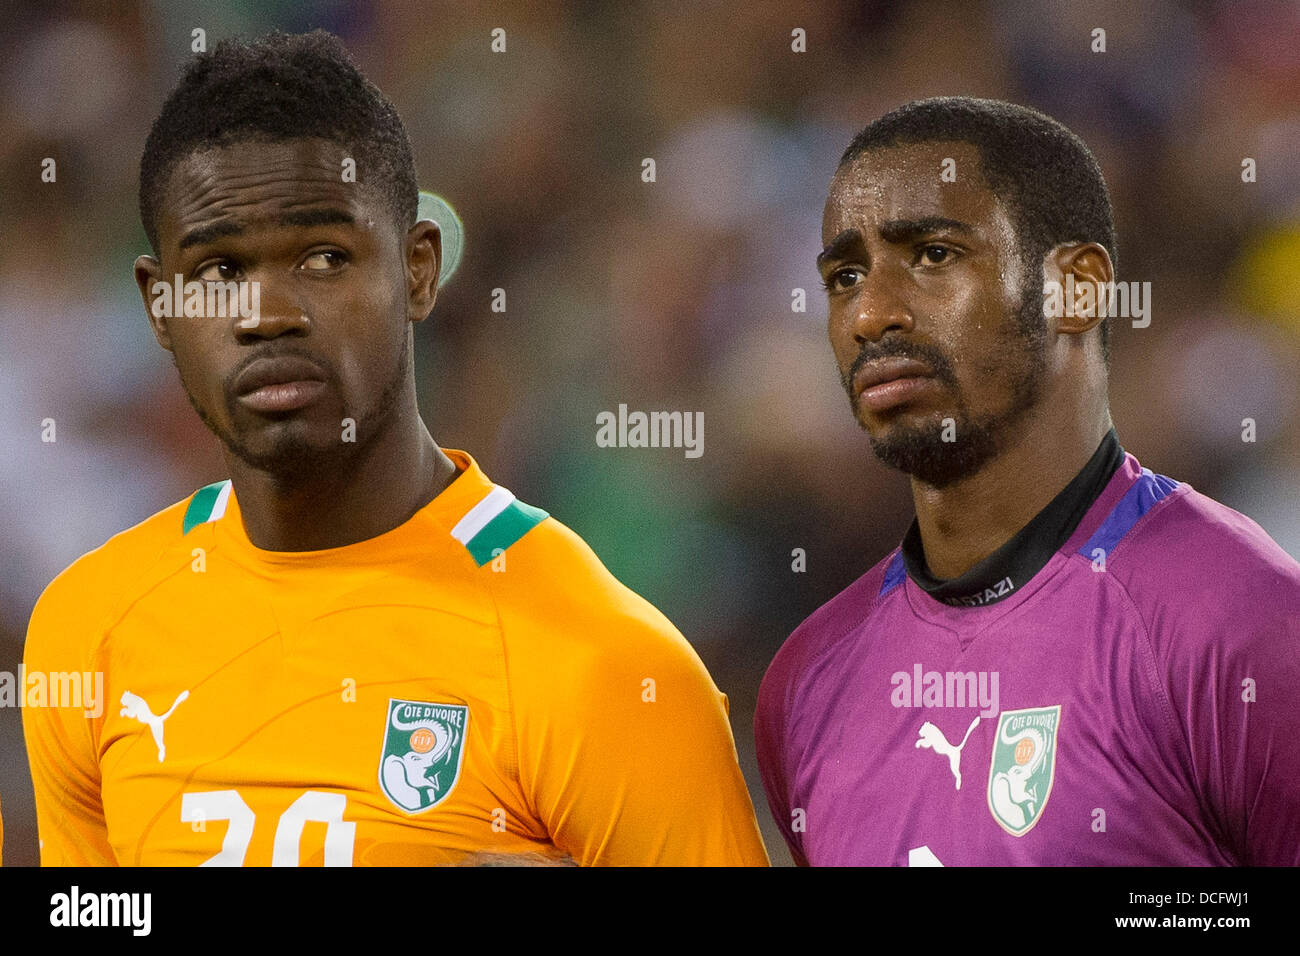 Aug. 14, 2013 - East Rutherford, New Jersey, U.S - August 14, 2013: Ivory Coast National Team midfielder Abdul Razak (20) and Ivory Coast National Team goalkeeper Boubacar Barry (1) look on prior to the International friendly match between Mexico and Ivory Coast at Met Life Stadium, East Rutherford, NJ. Mexico defeated Ivory Coast 4-1. Stock Photo